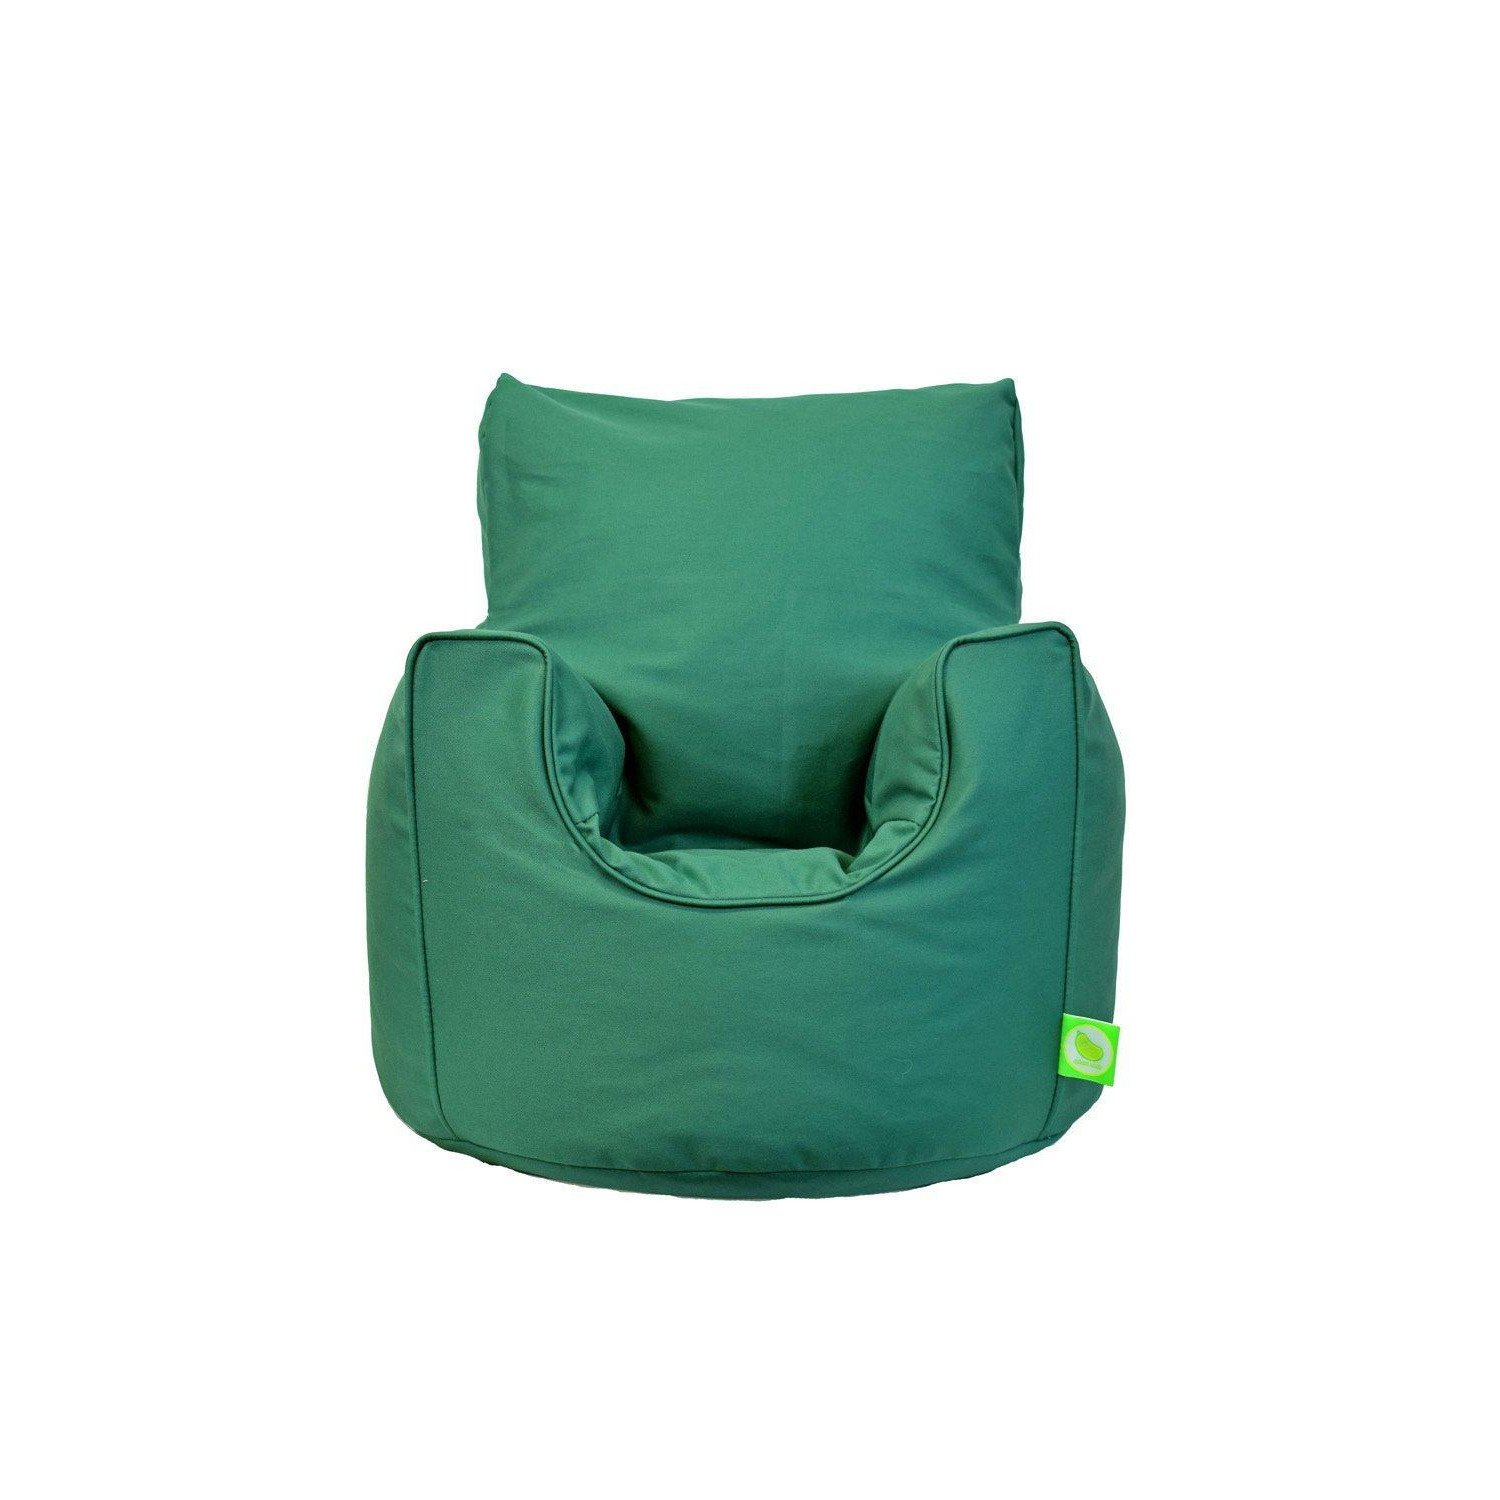 Cotton Twill British Racing Green Bean Bag Arm Chair Toddler Size - image 1